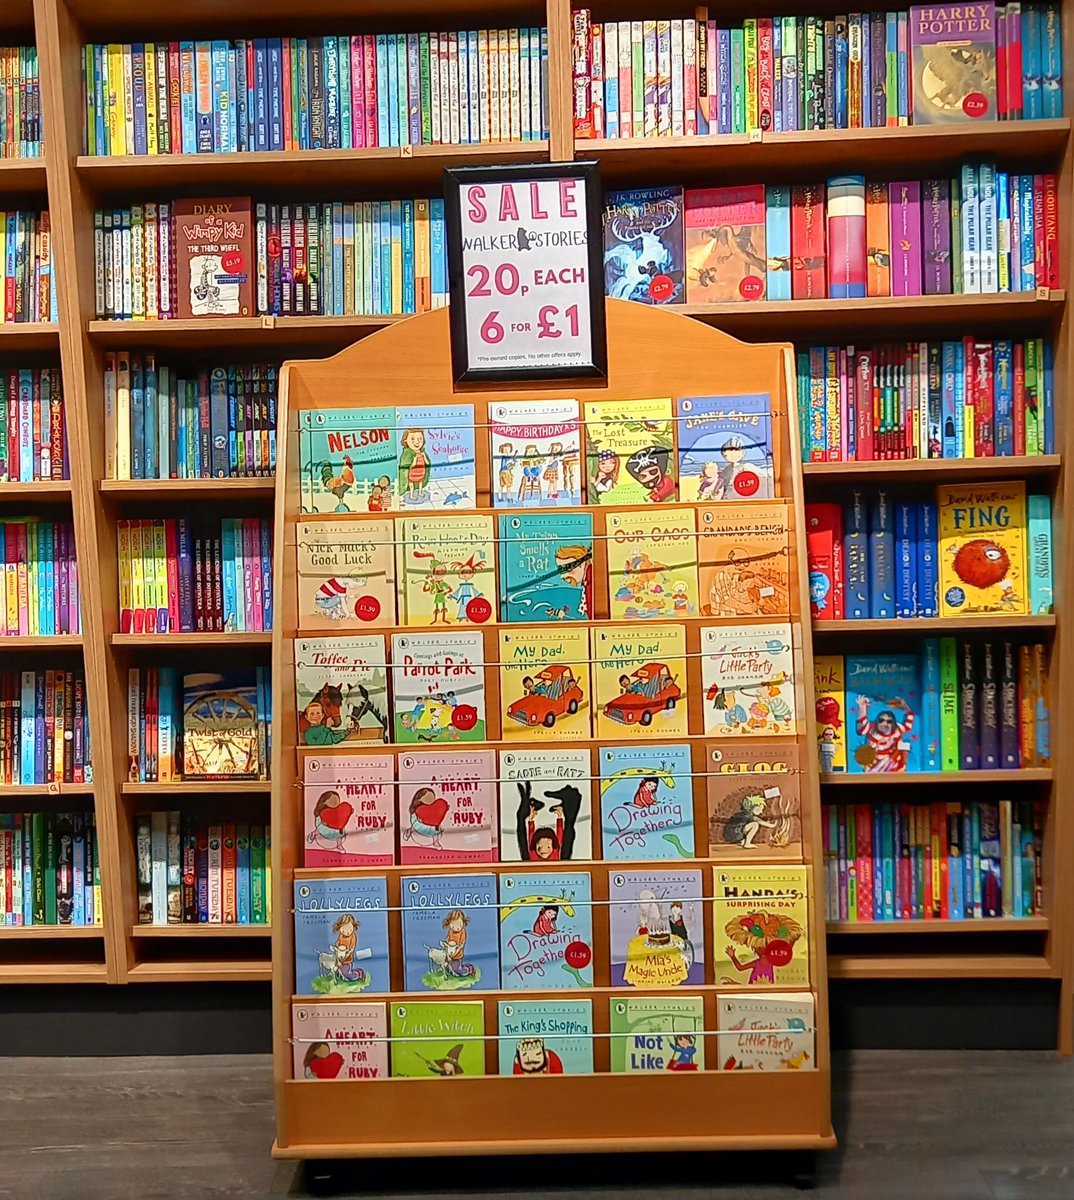 While supplies last: Pre-owned Walker books for early readers are 20p each or 6 for £1. Offer available in shop only. #GoldstoneBooks #indiebookshop #shoplocal #preowned #sale